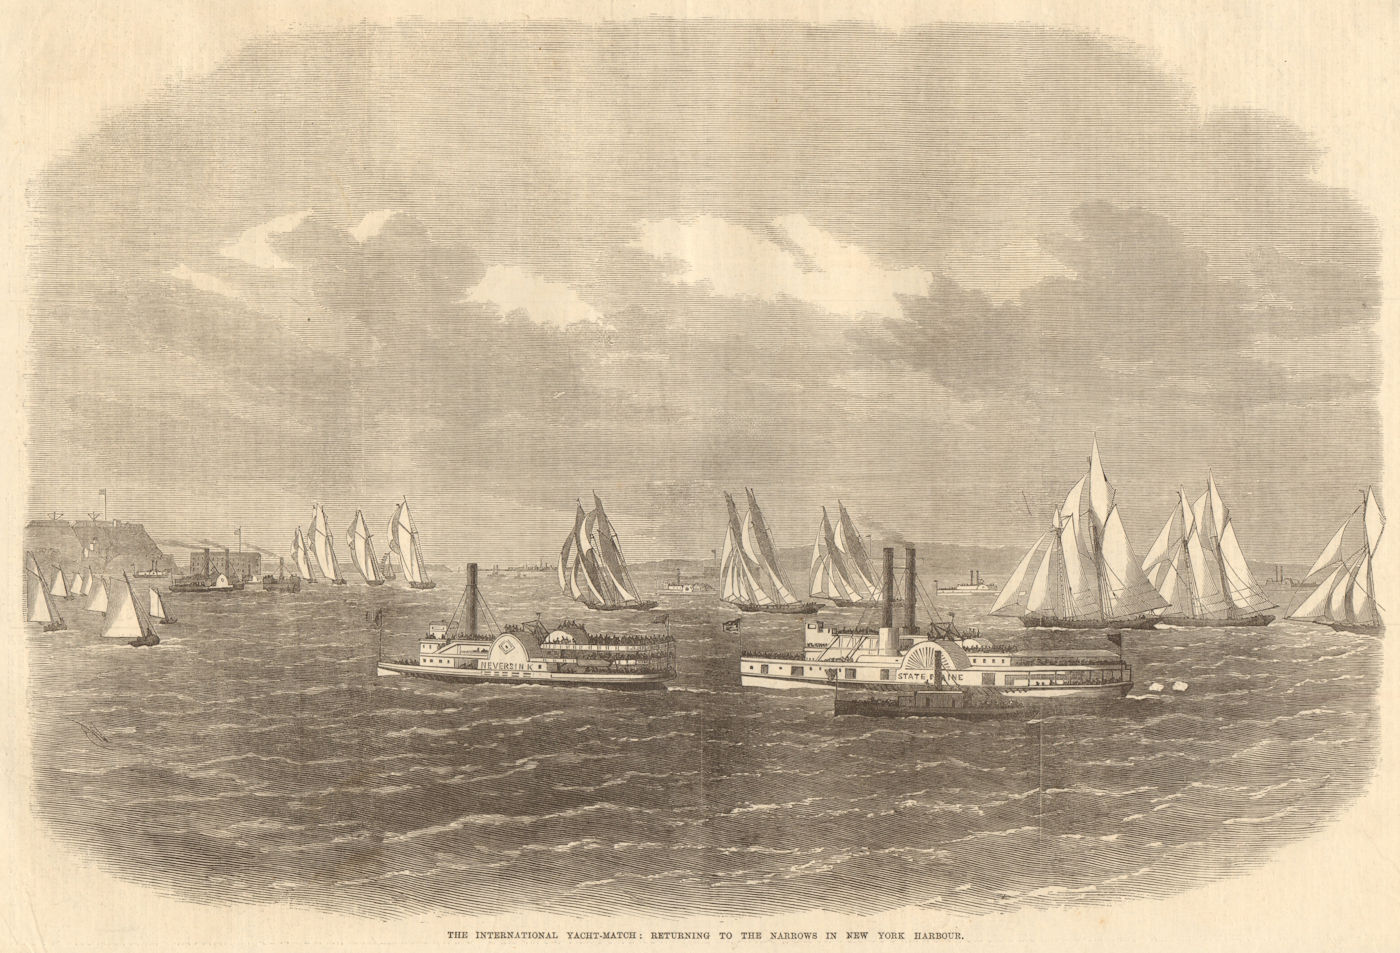 Associate Product 1870 America's Cup. Yacht match: returning to the New York Harbour narrows 1870